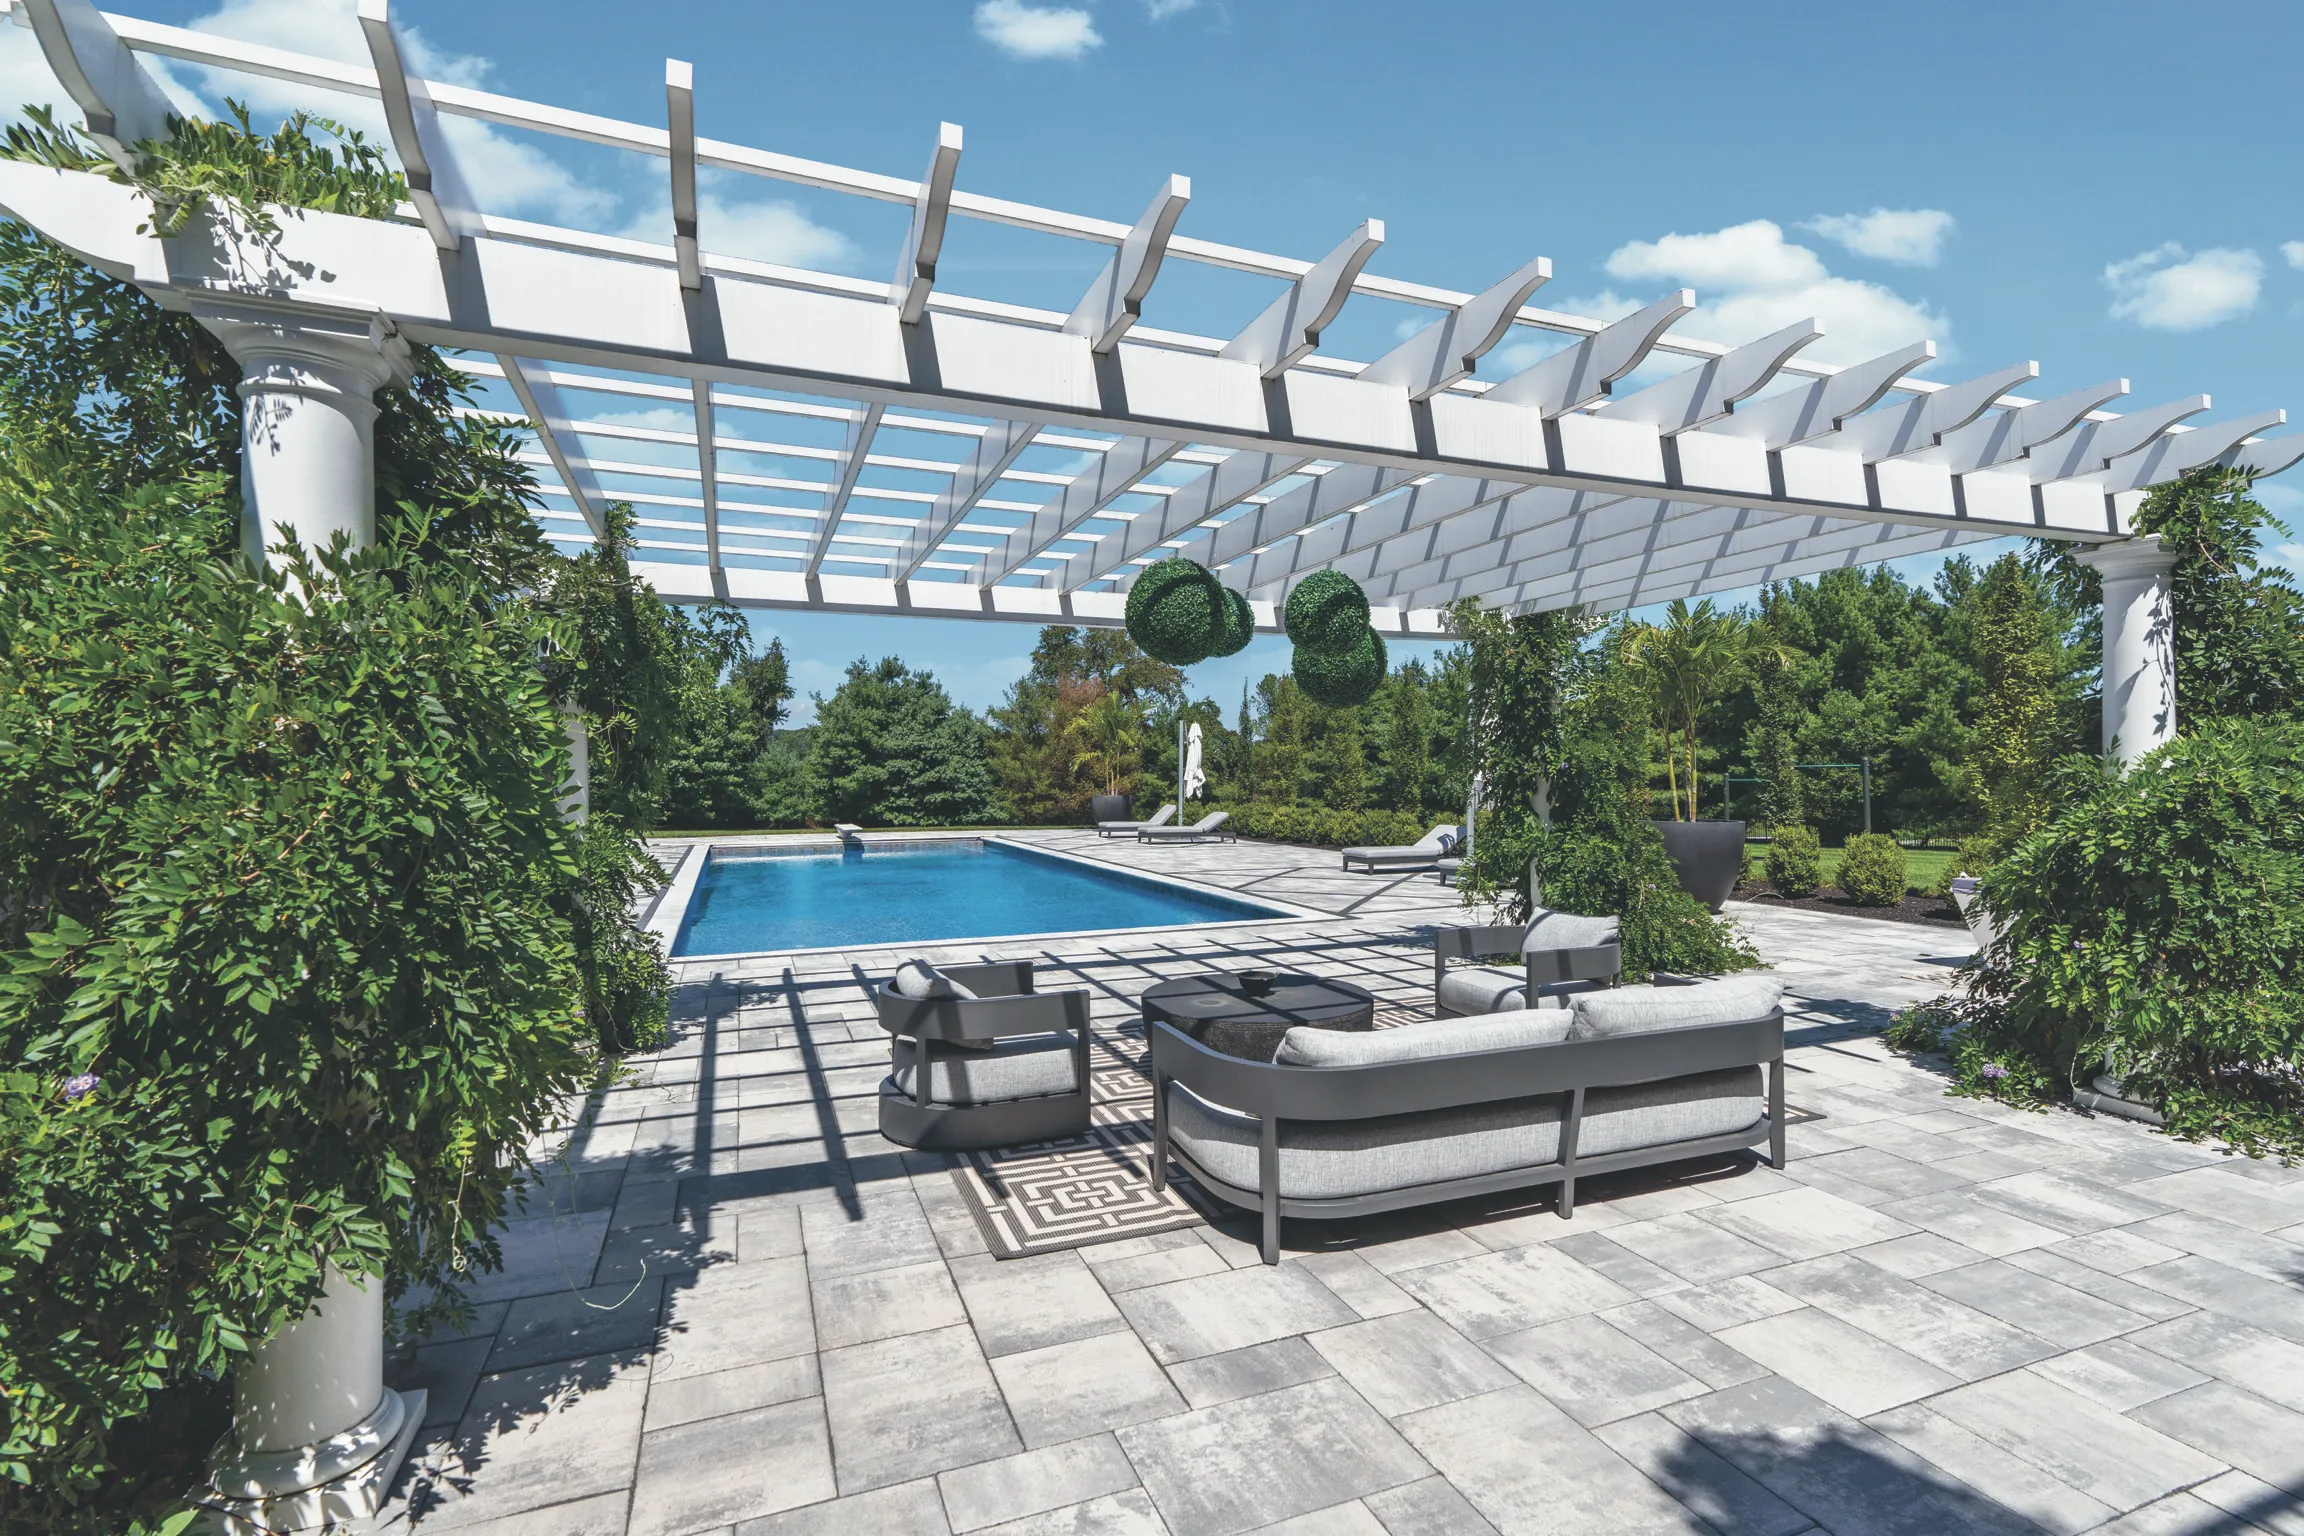 Modern poolside lounge area with a white pergola, stylish outdoor furniture, and lush landscaping under a clear blue sky.